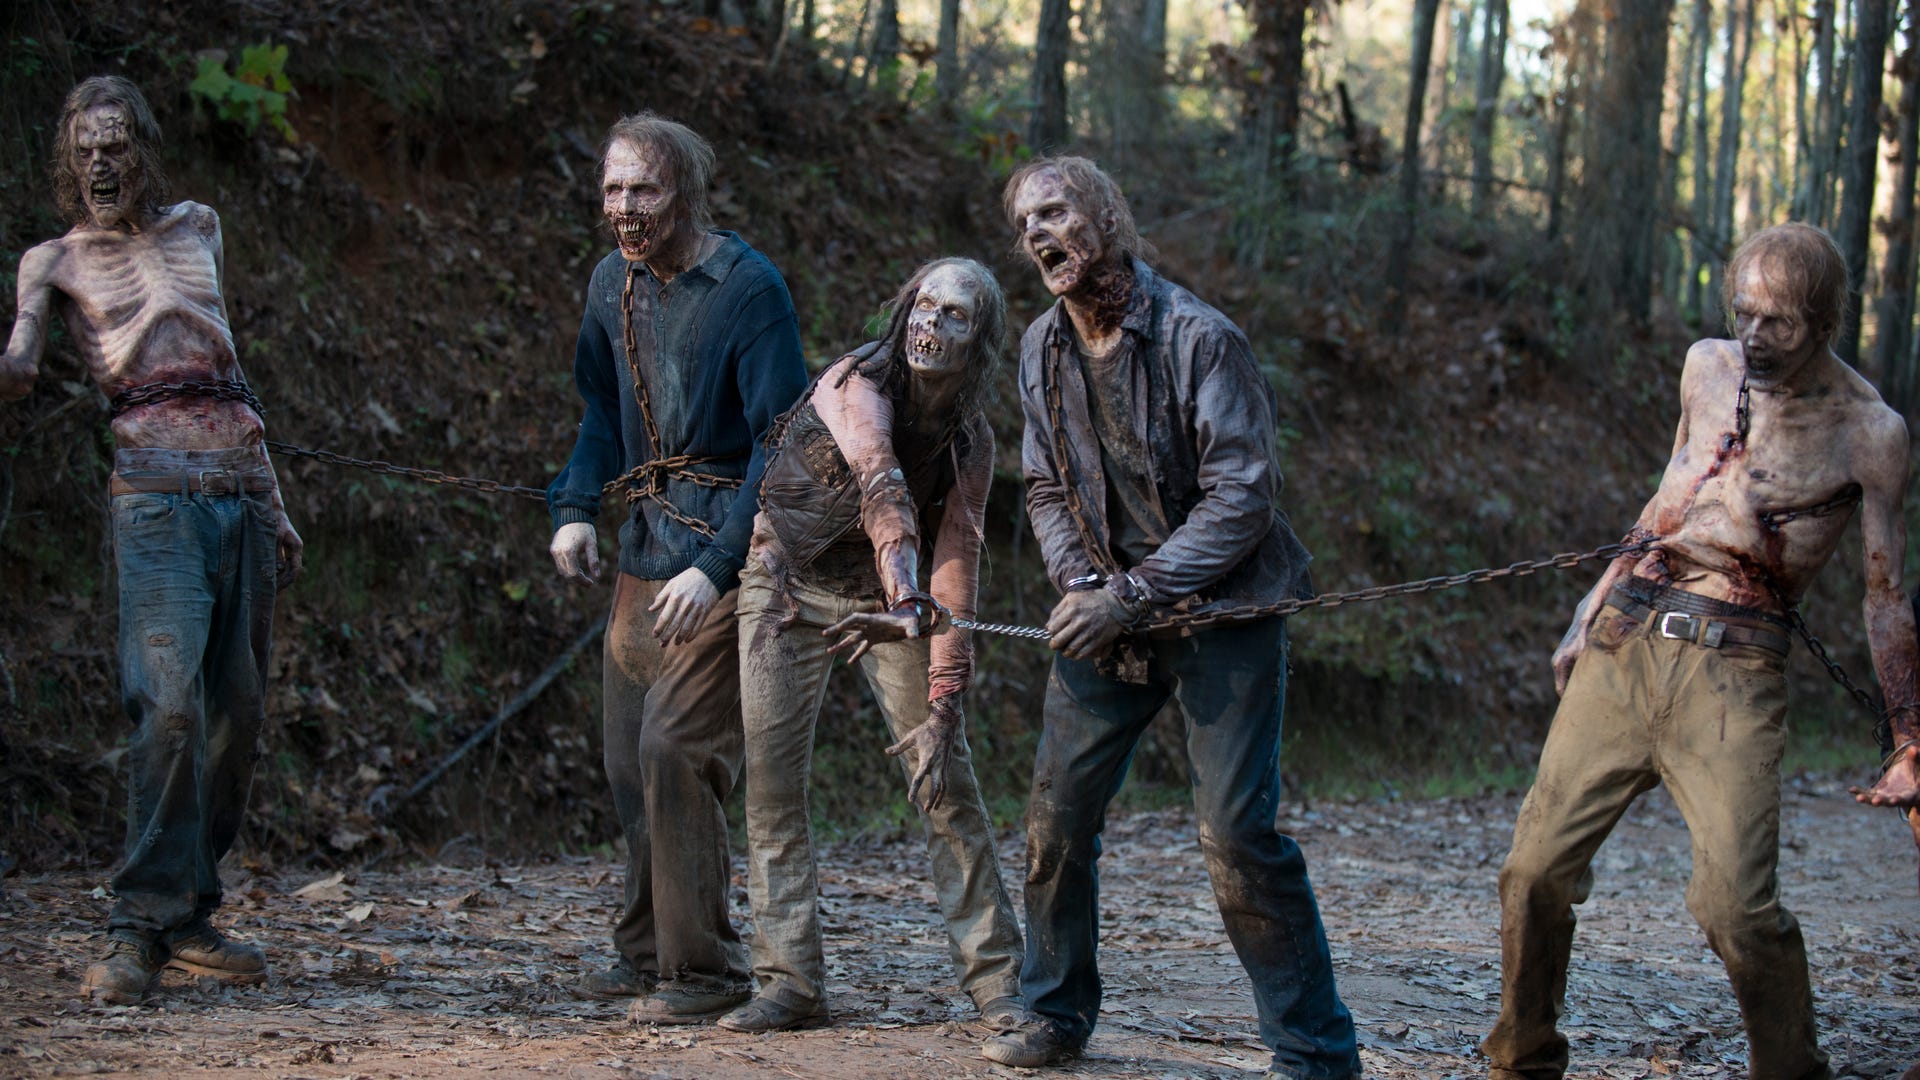 twd-ep616-chained-walkers.jpg